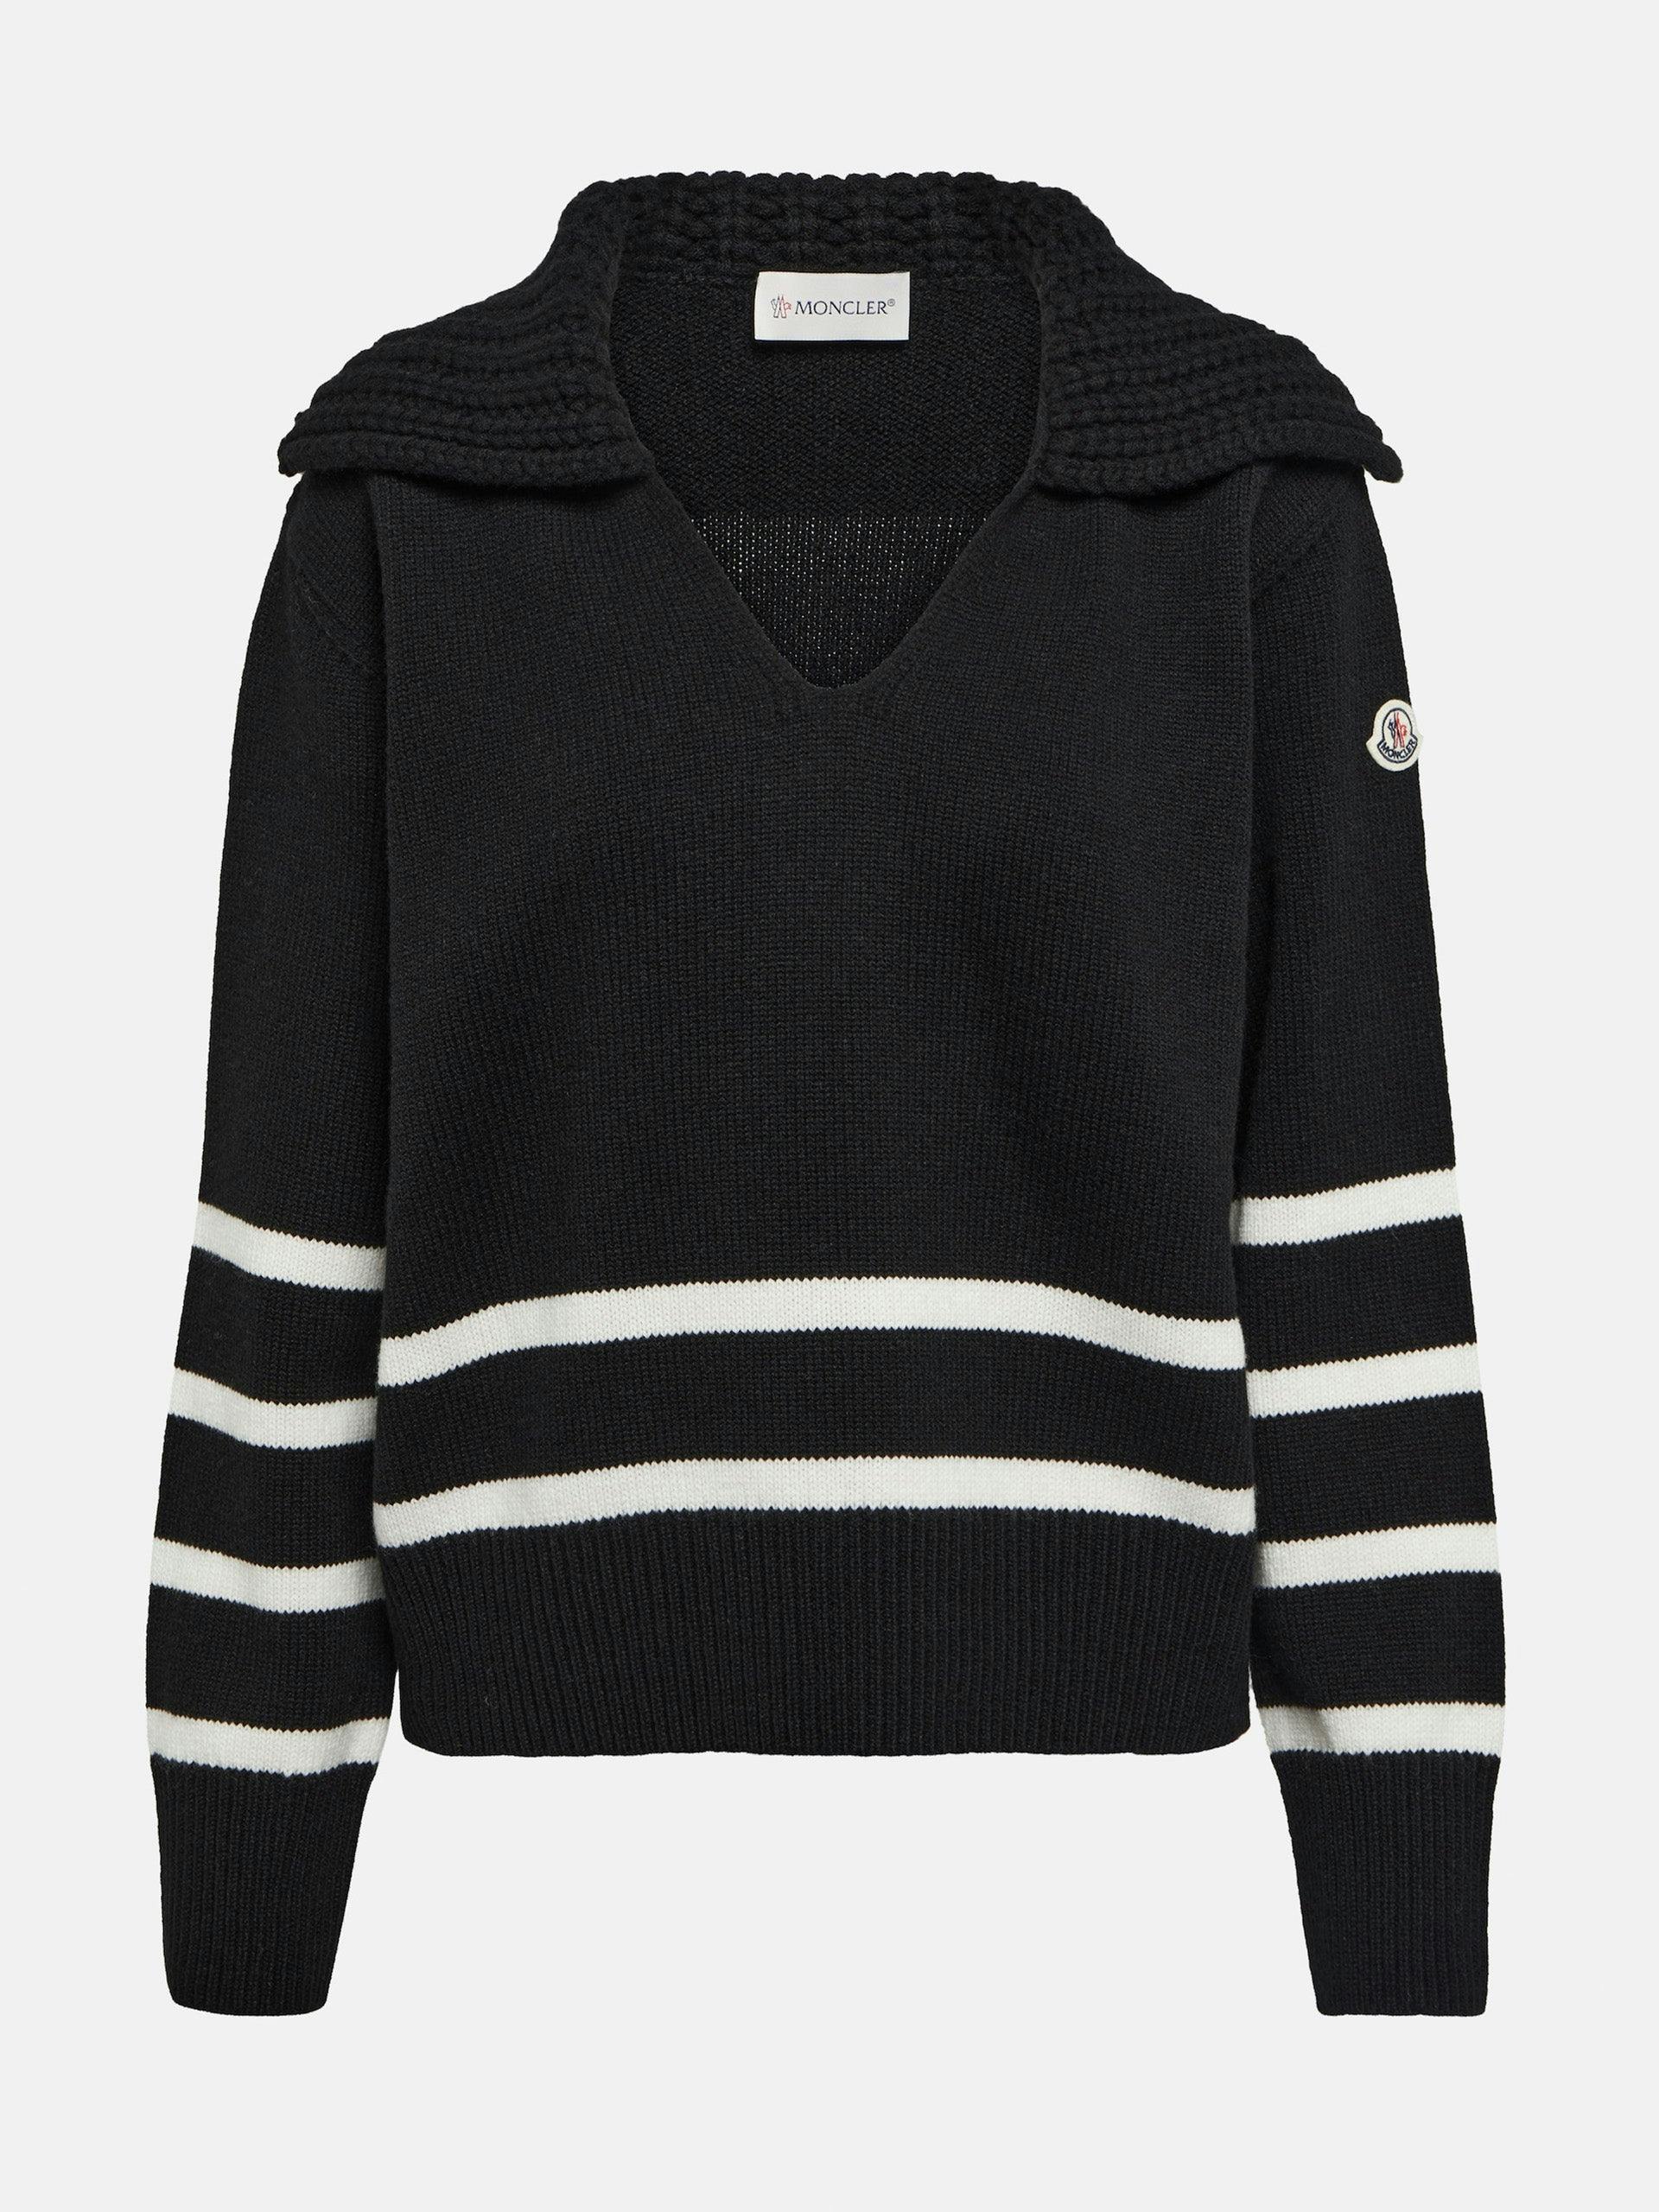 Striped wool and cashmere sweater